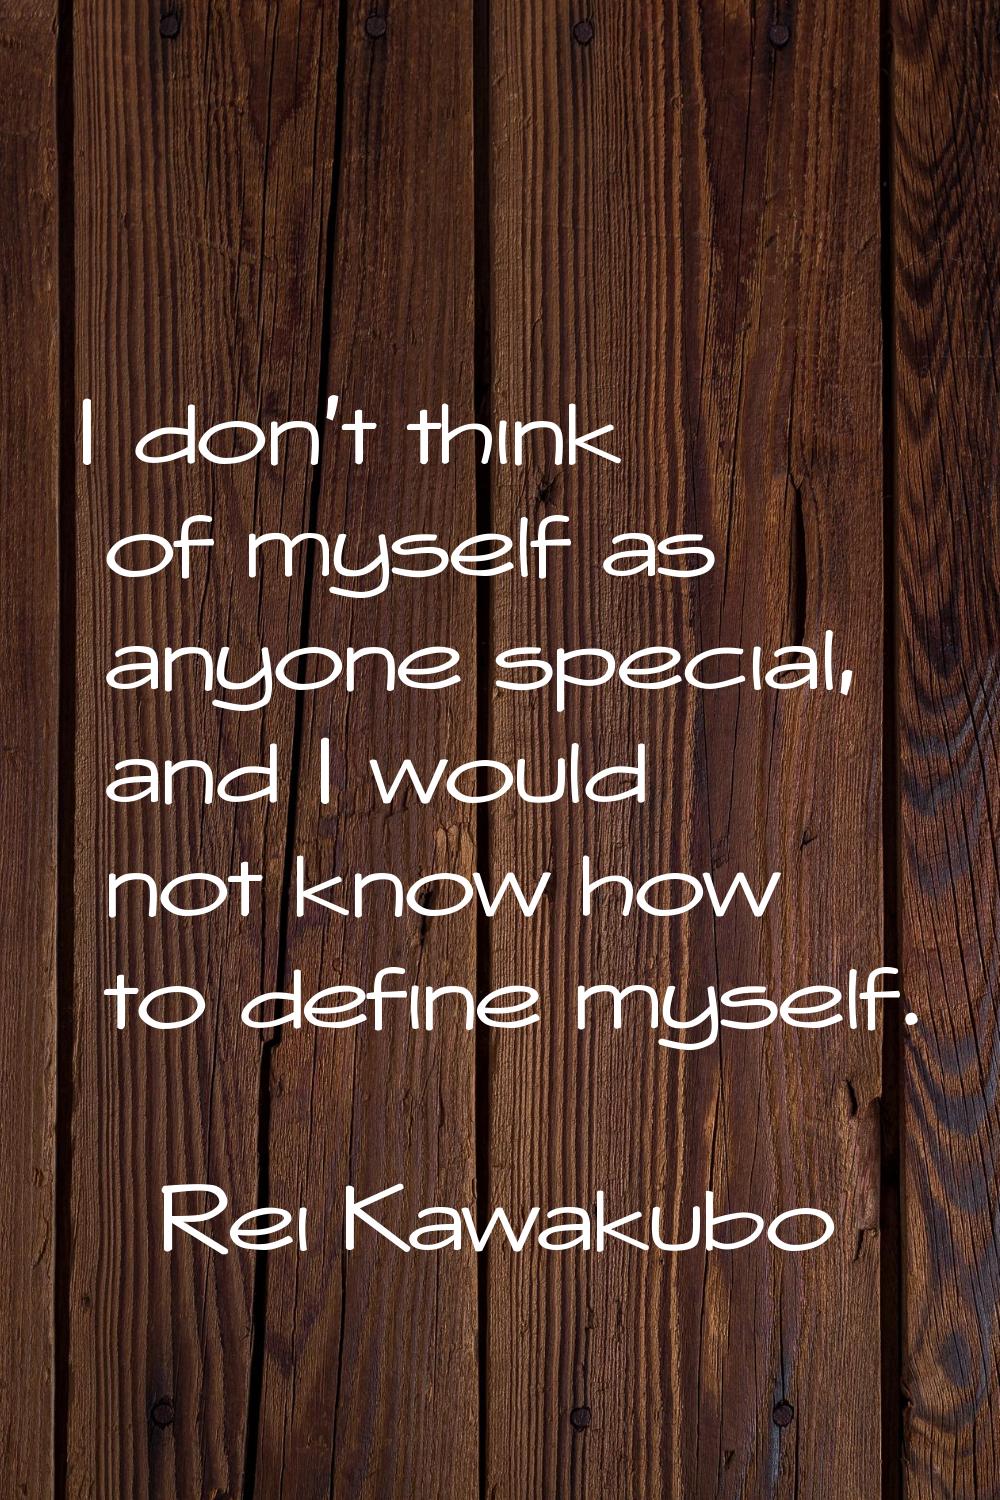 I don't think of myself as anyone special, and I would not know how to define myself.